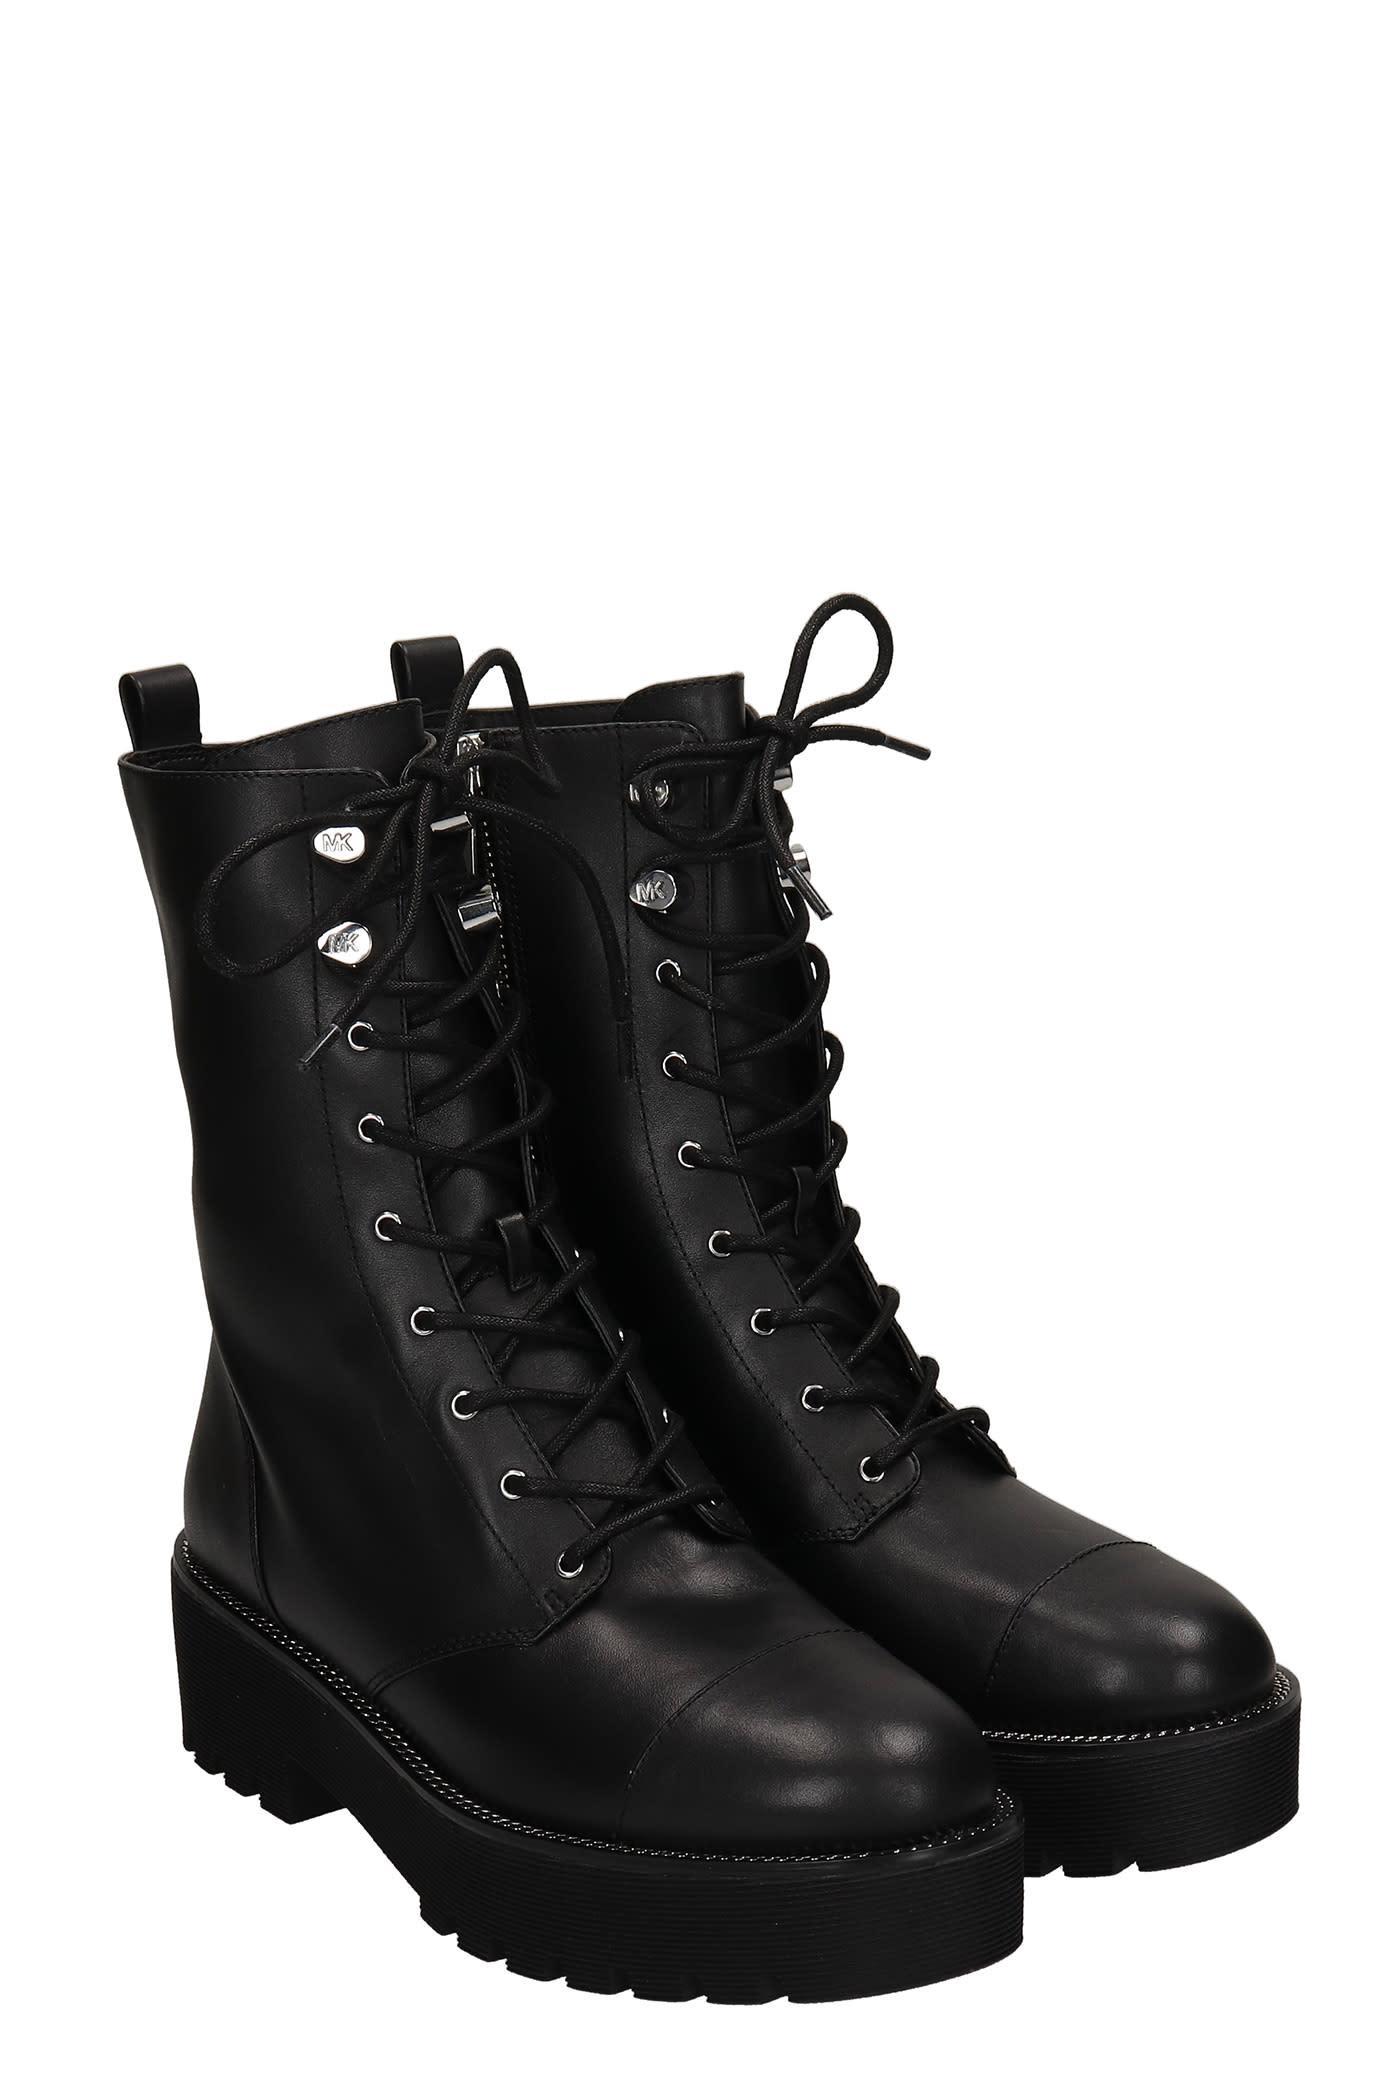 Michael Kors Bryce Combat Boots In Leather in Black - Lyst